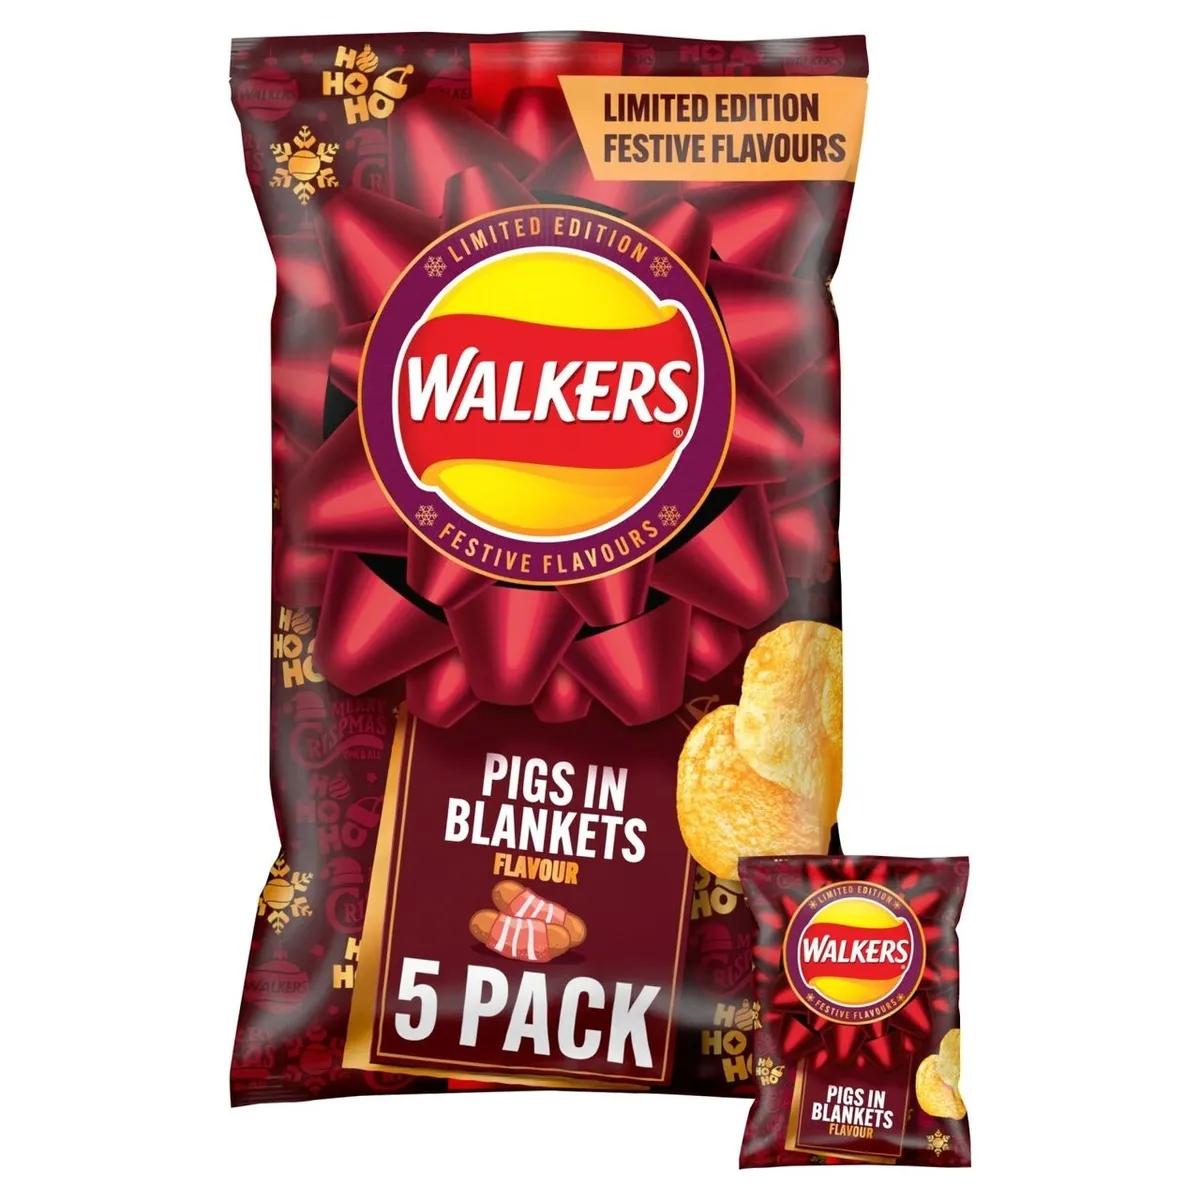 walkers smoked pigs in blankets crisps - What is the most popular Flavour of Walkers Crisps